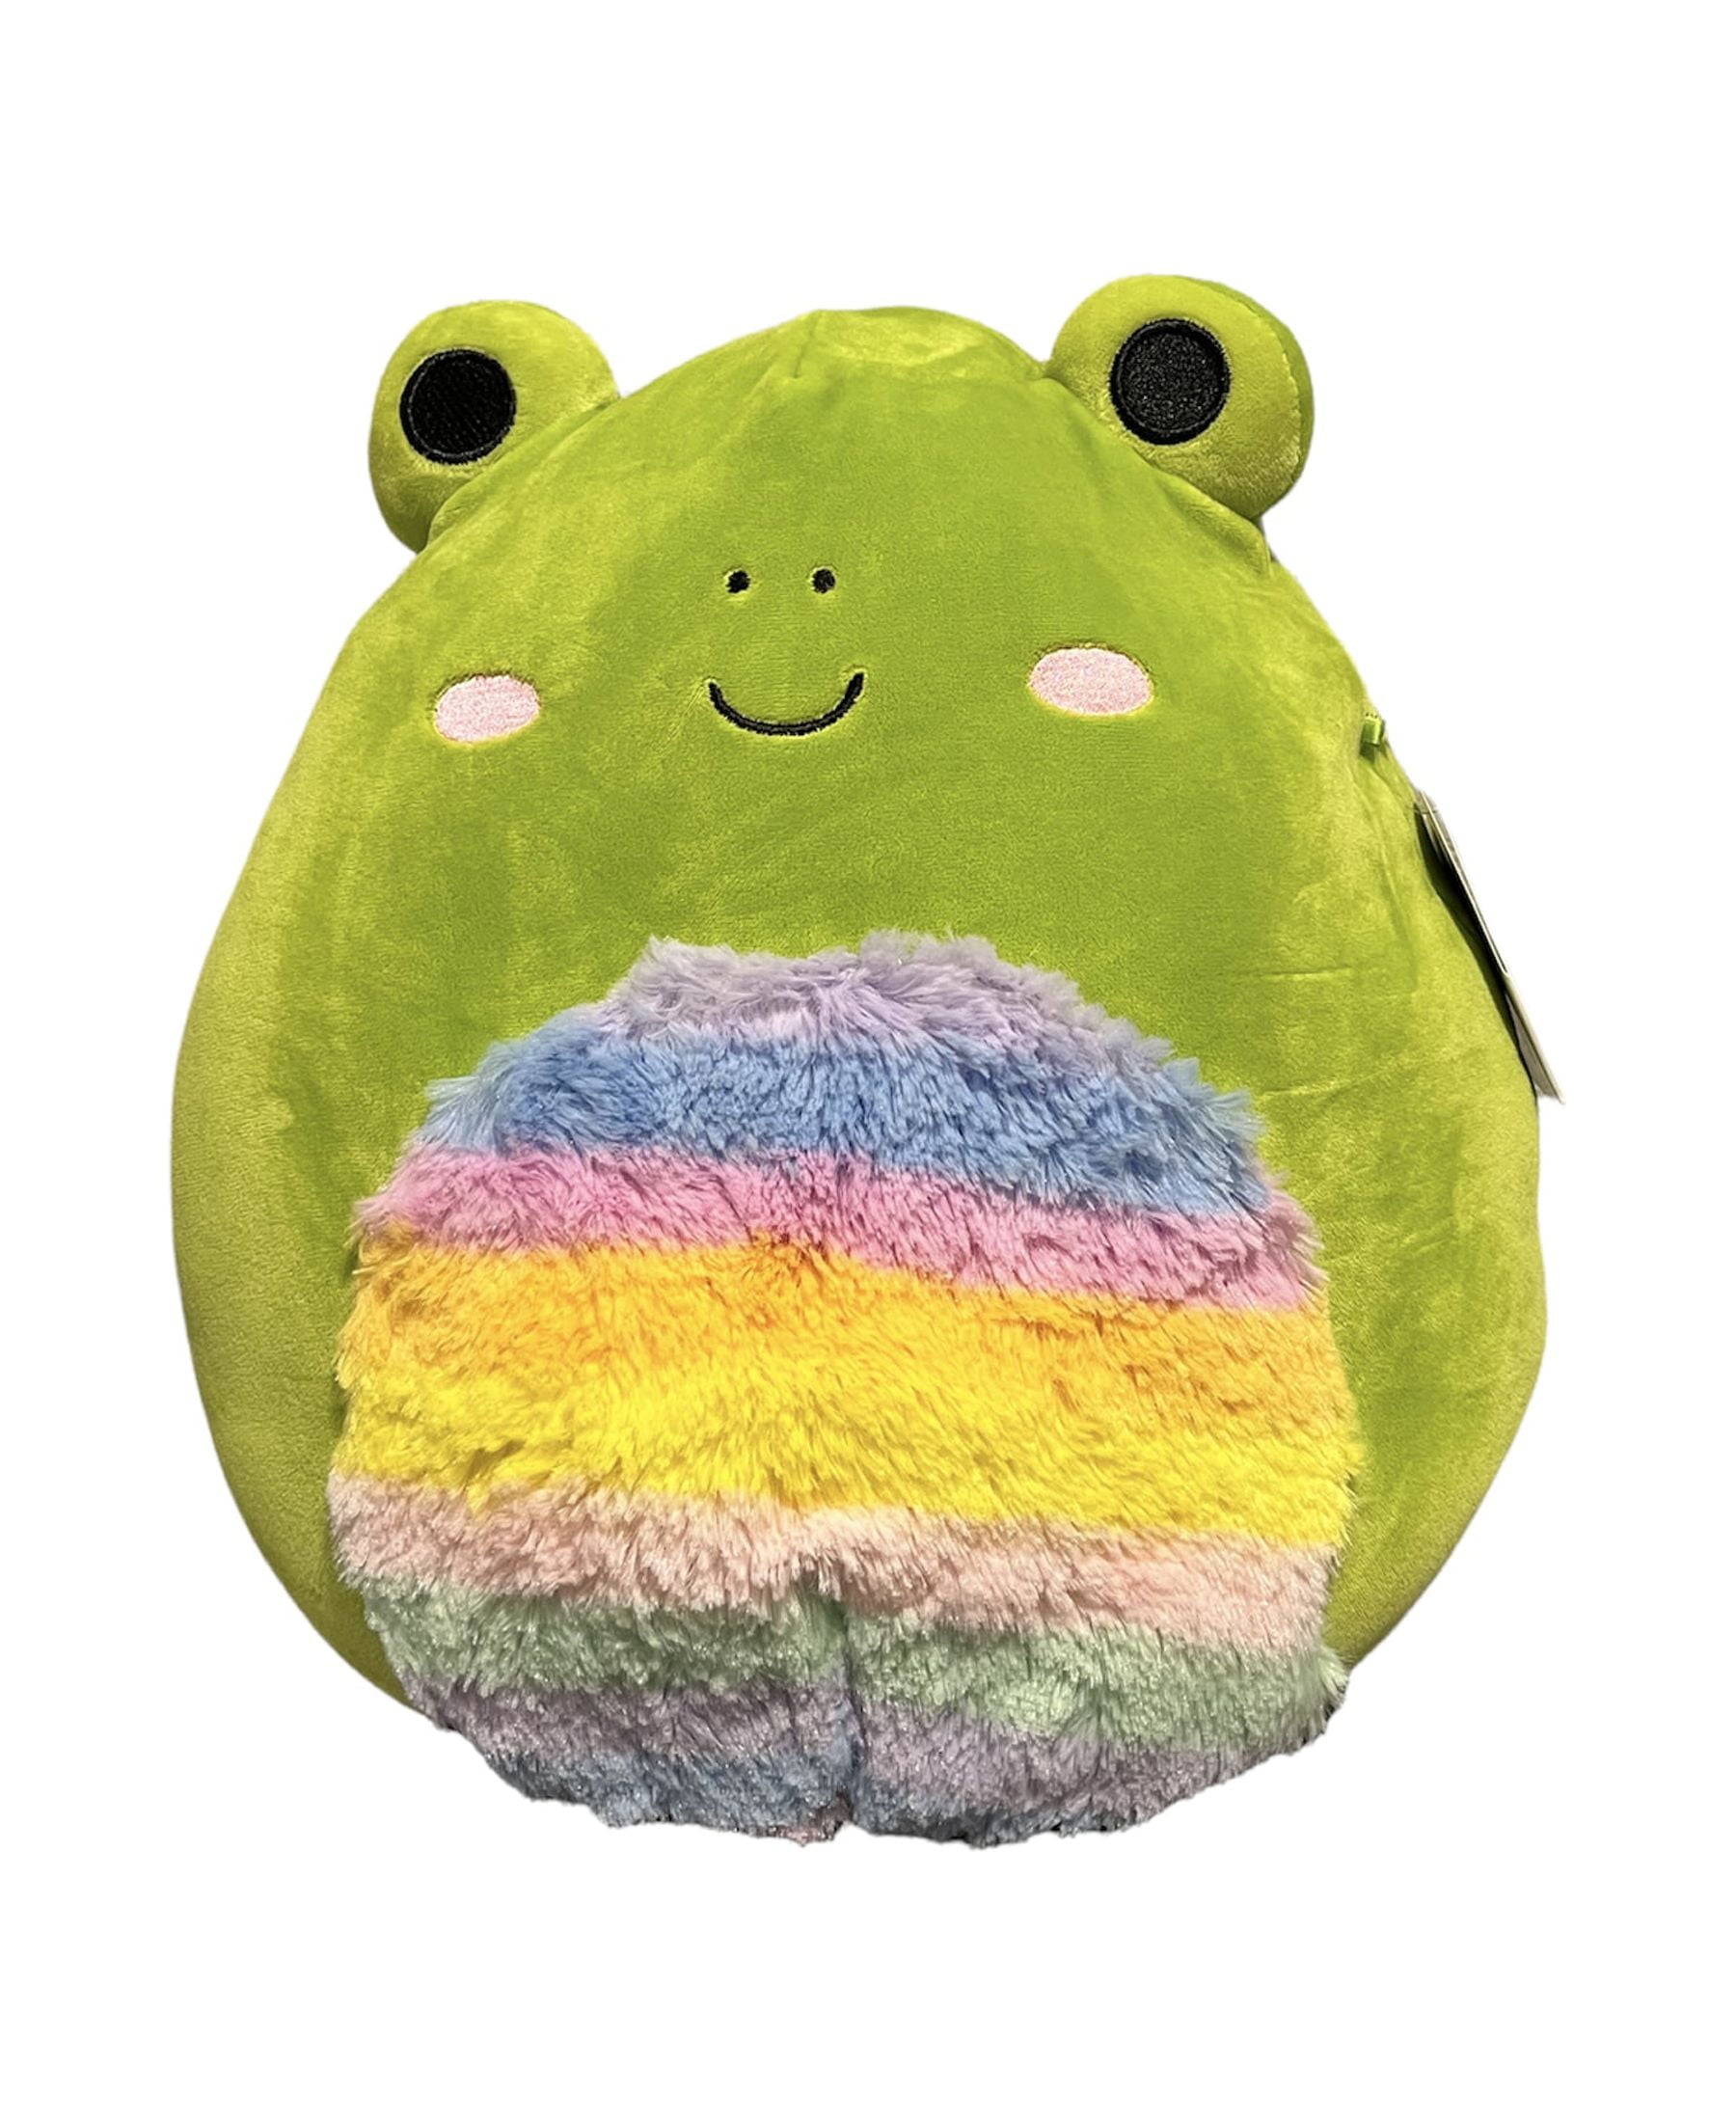 Squishmallows 12 Wendy the Frog with Fuzzy Belly